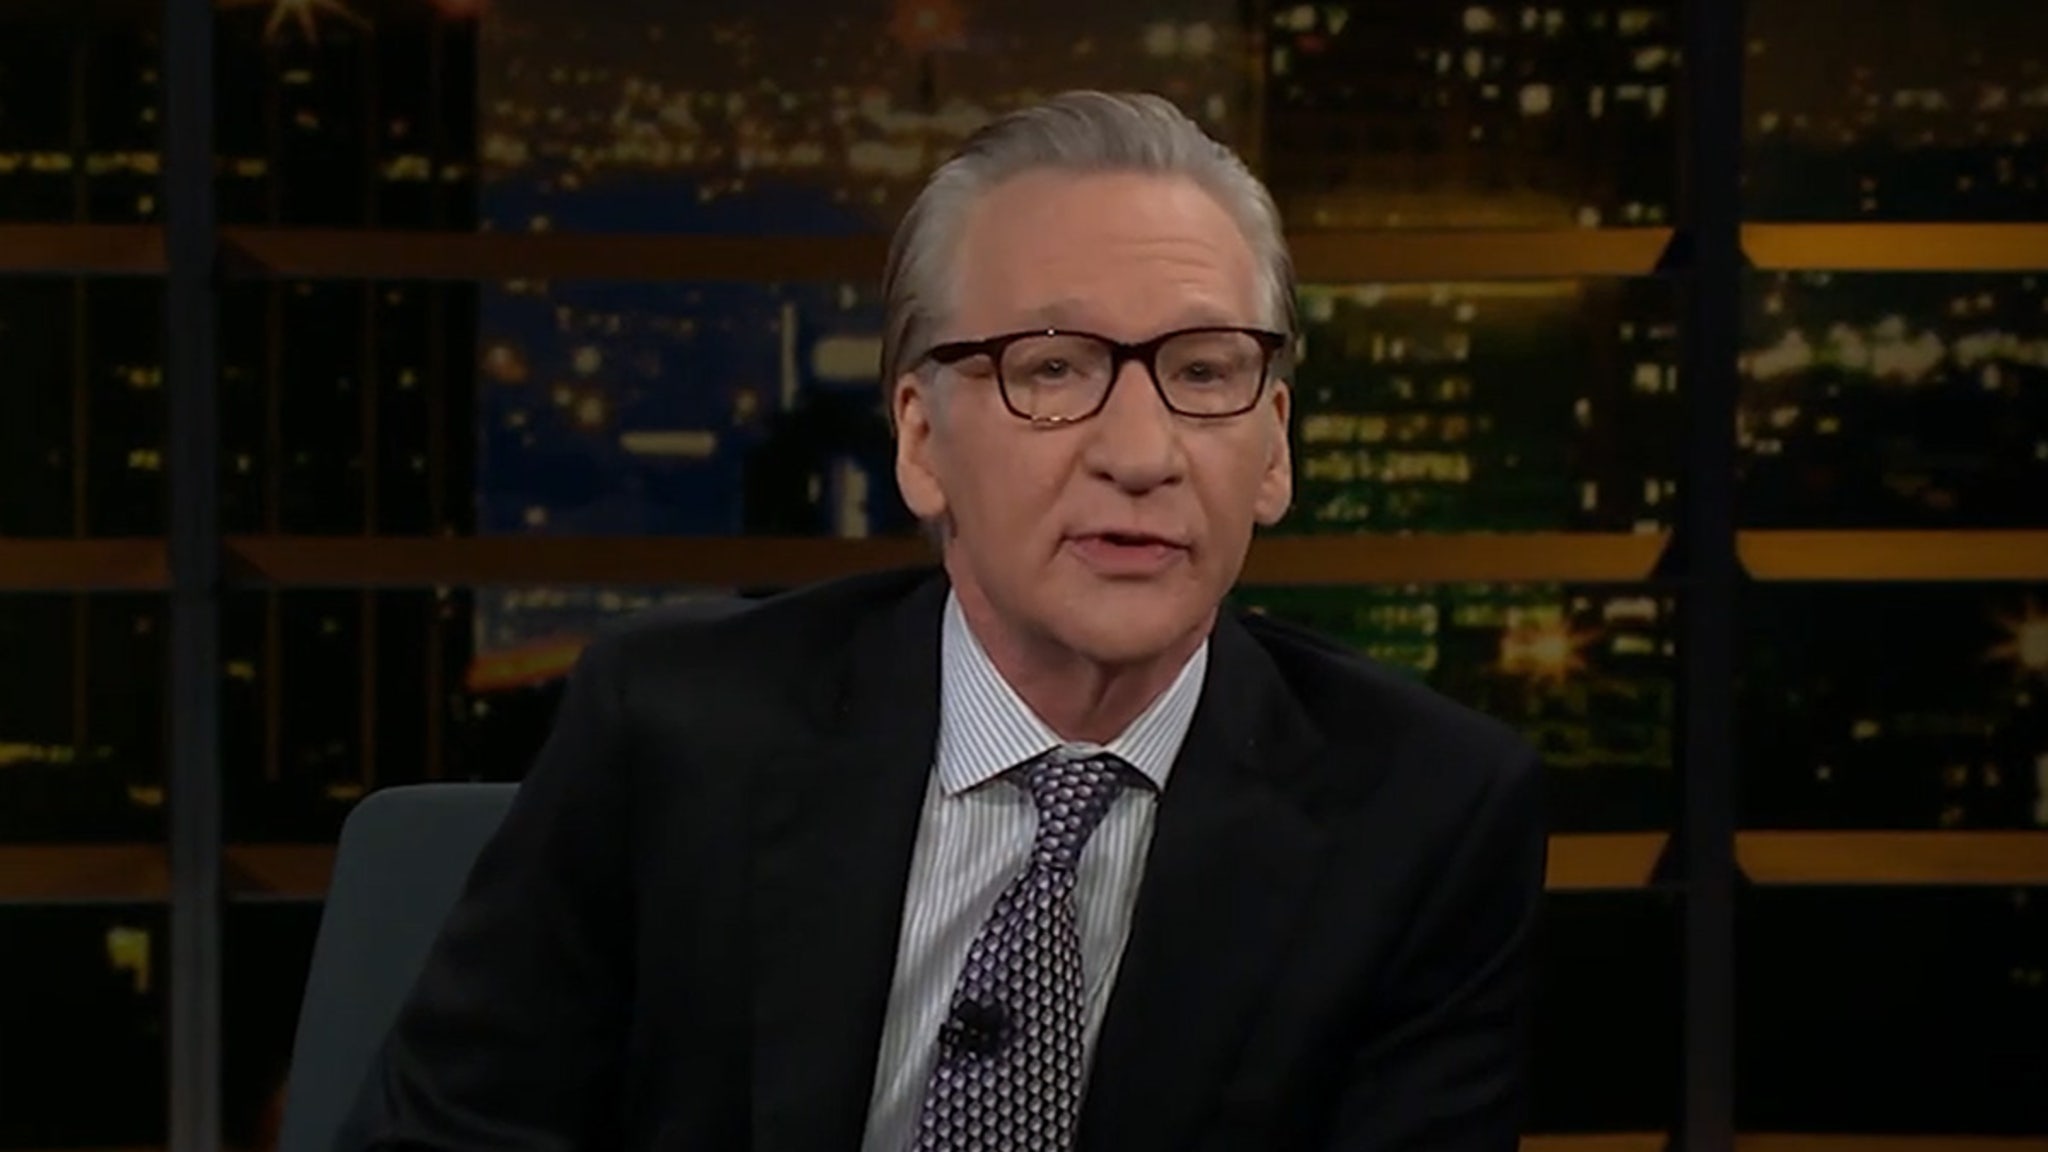 Bill Maher Says American Democracy Is Failing b/c We're 'S***tier People' Than Before